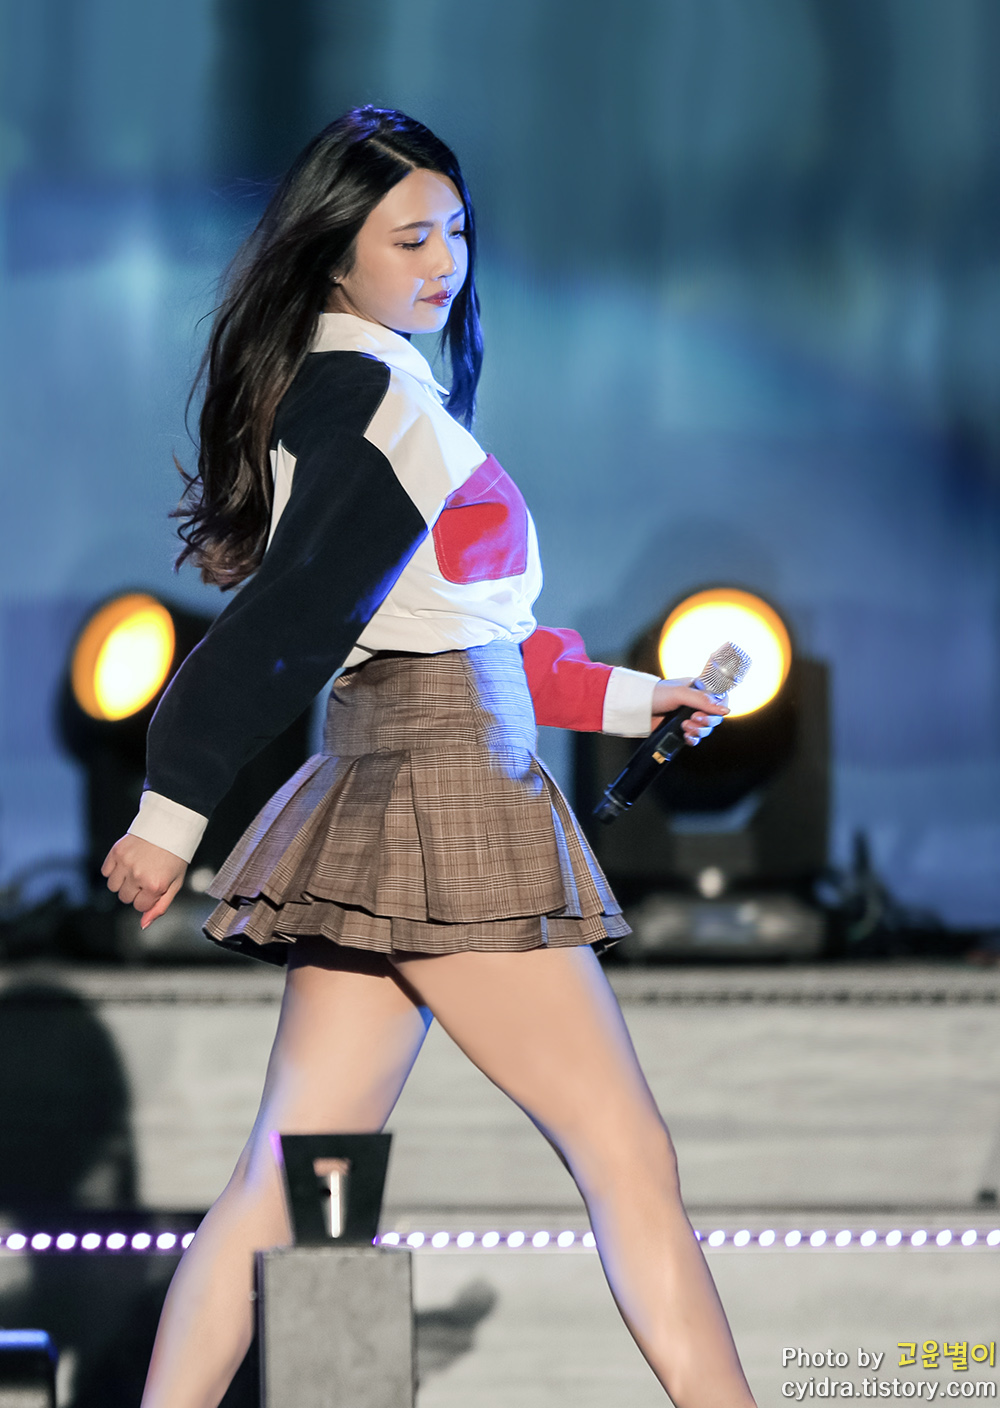 I Love Red Velvet : JOY RV @ 26TH DIVISION ARMY BAND YEAR END CONCERT